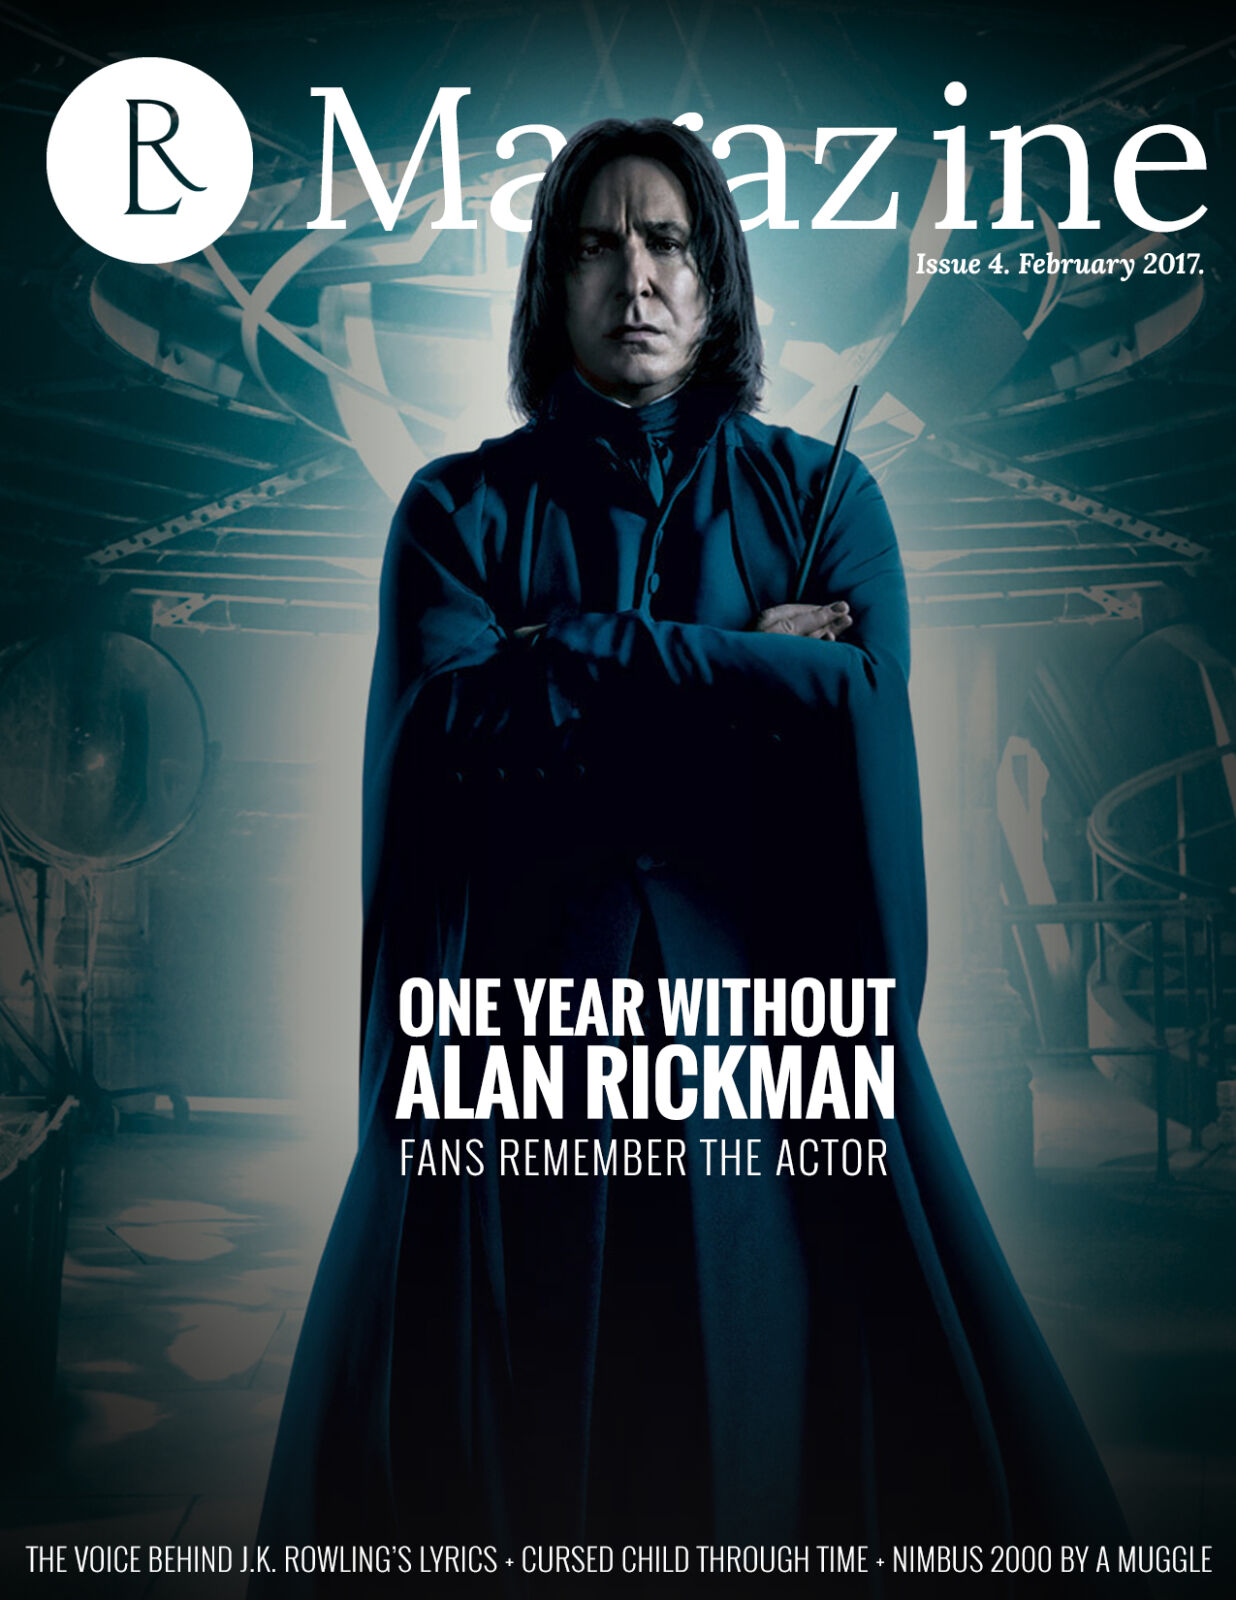 The Rowling Library Magazine #4 (February 2017): One year without Alan Rickman